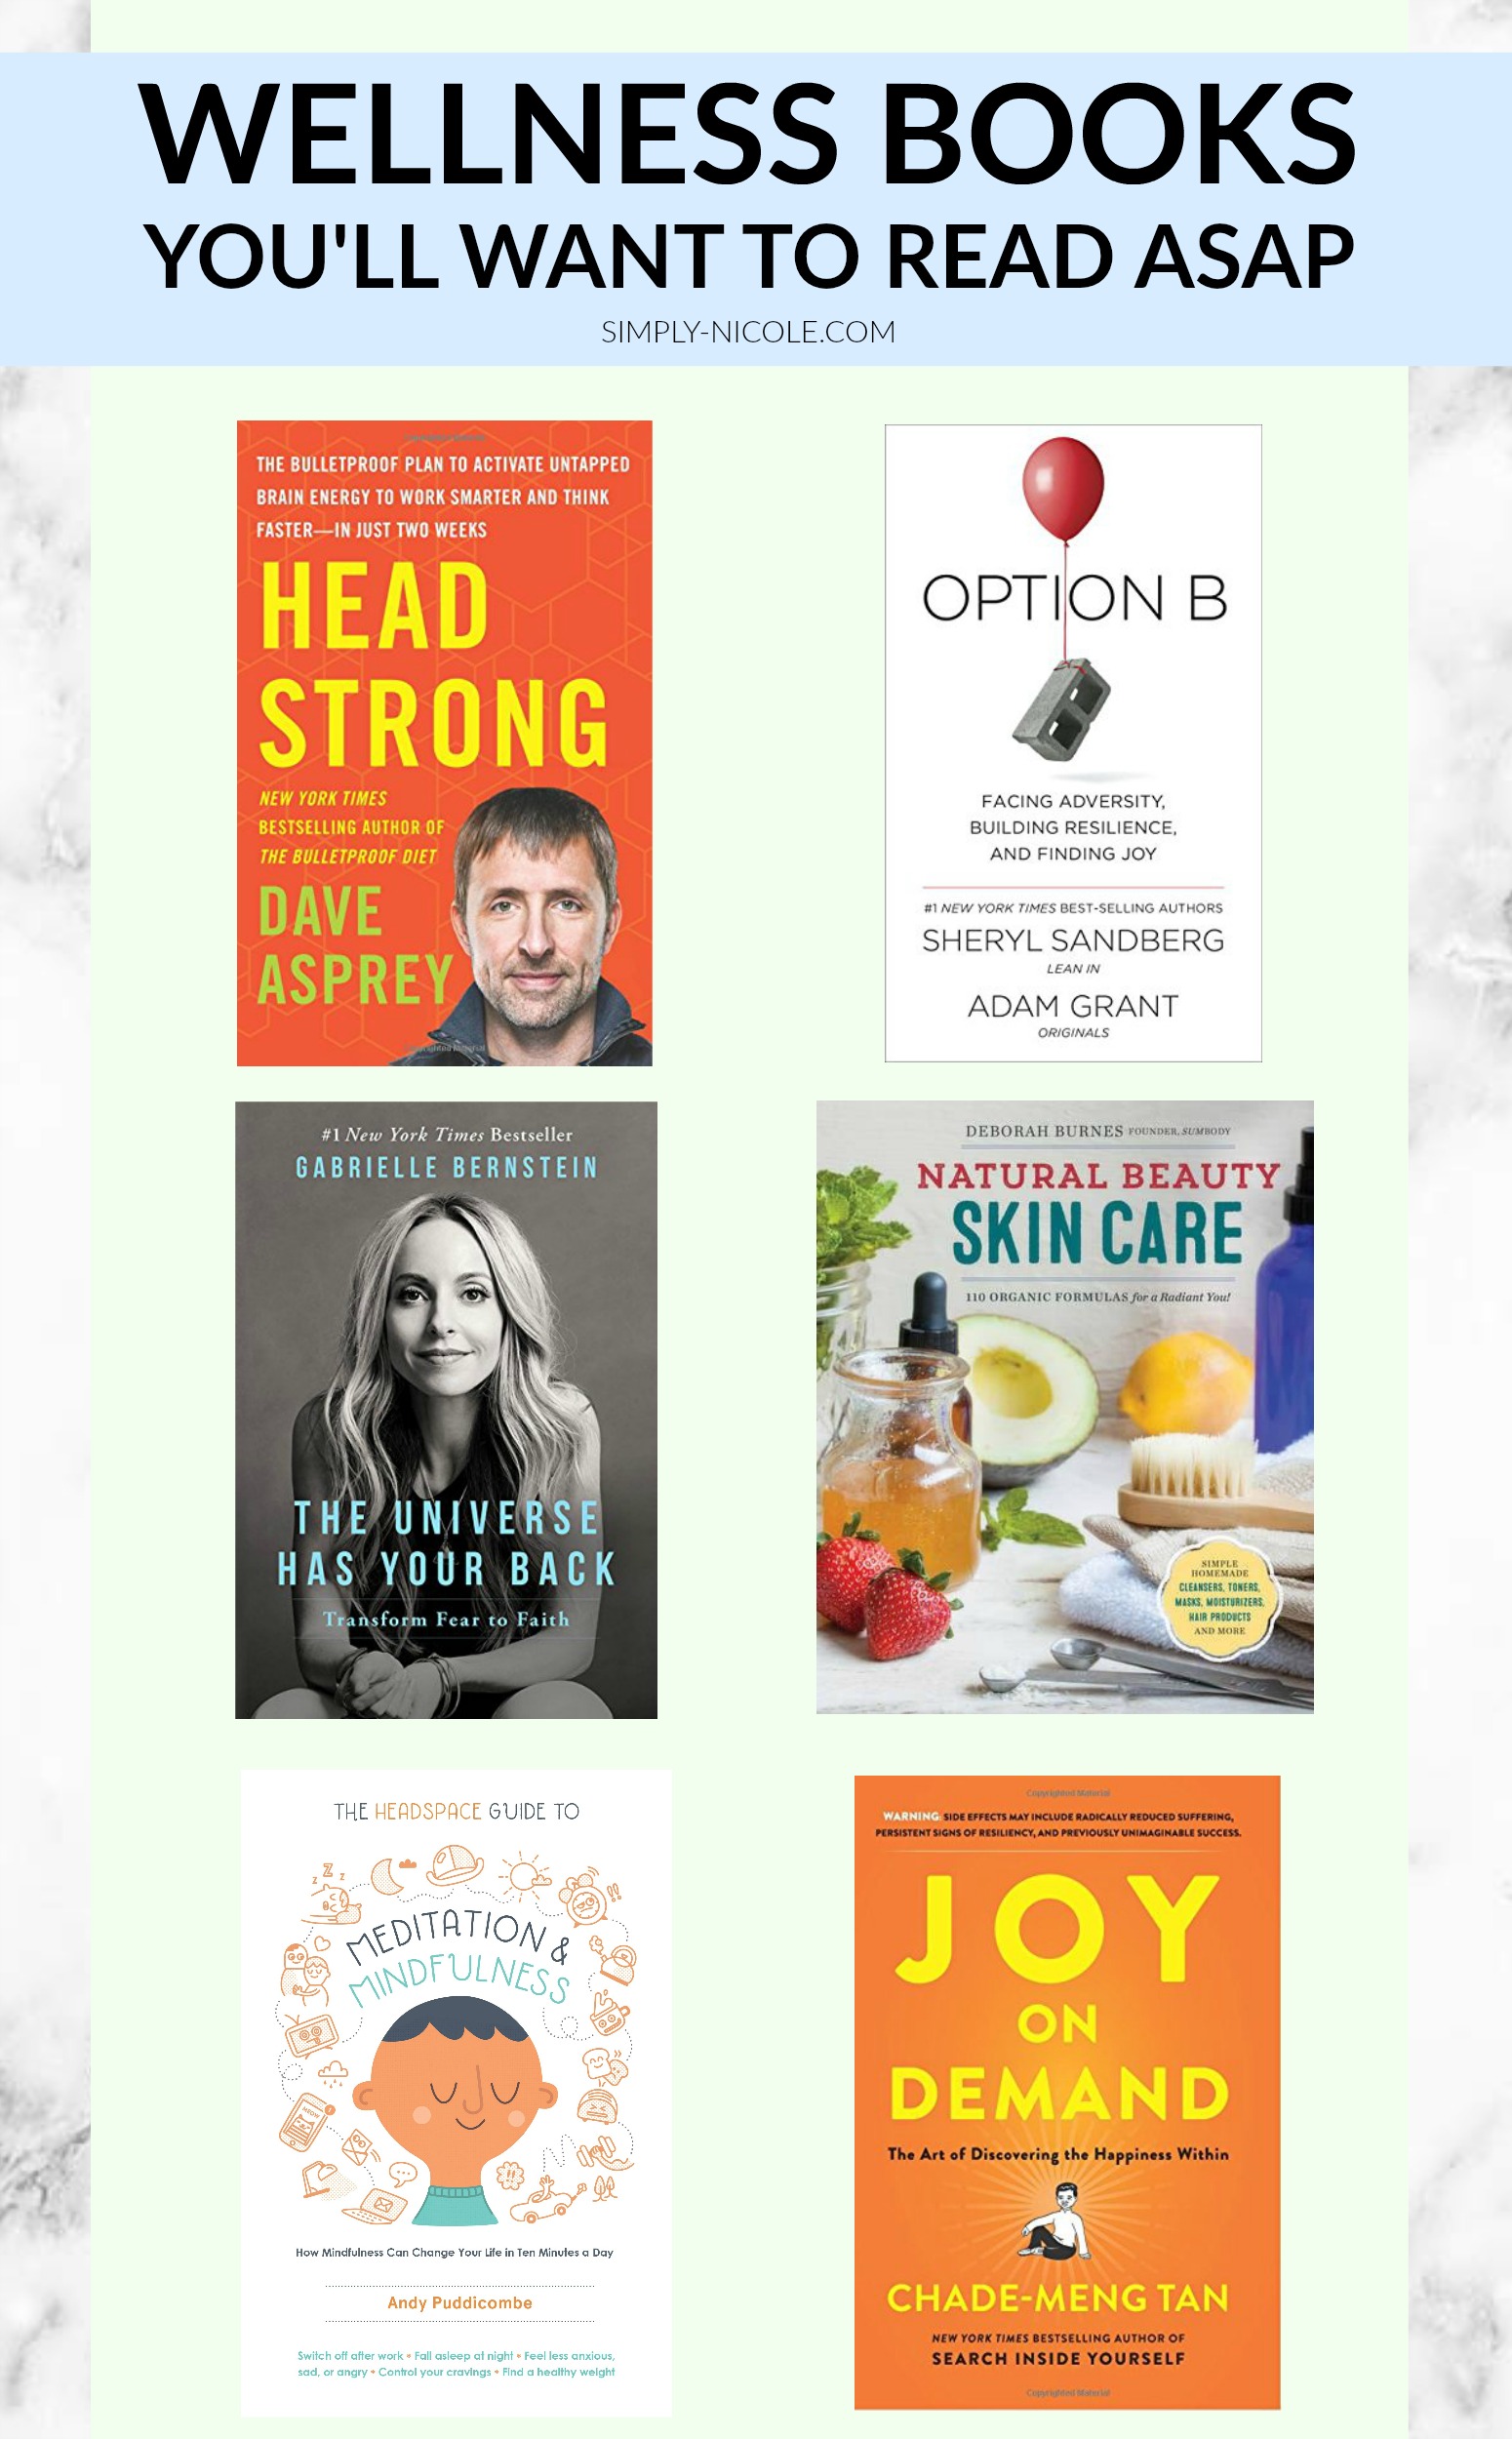 Wellness Books You'll Want to Read ASAP